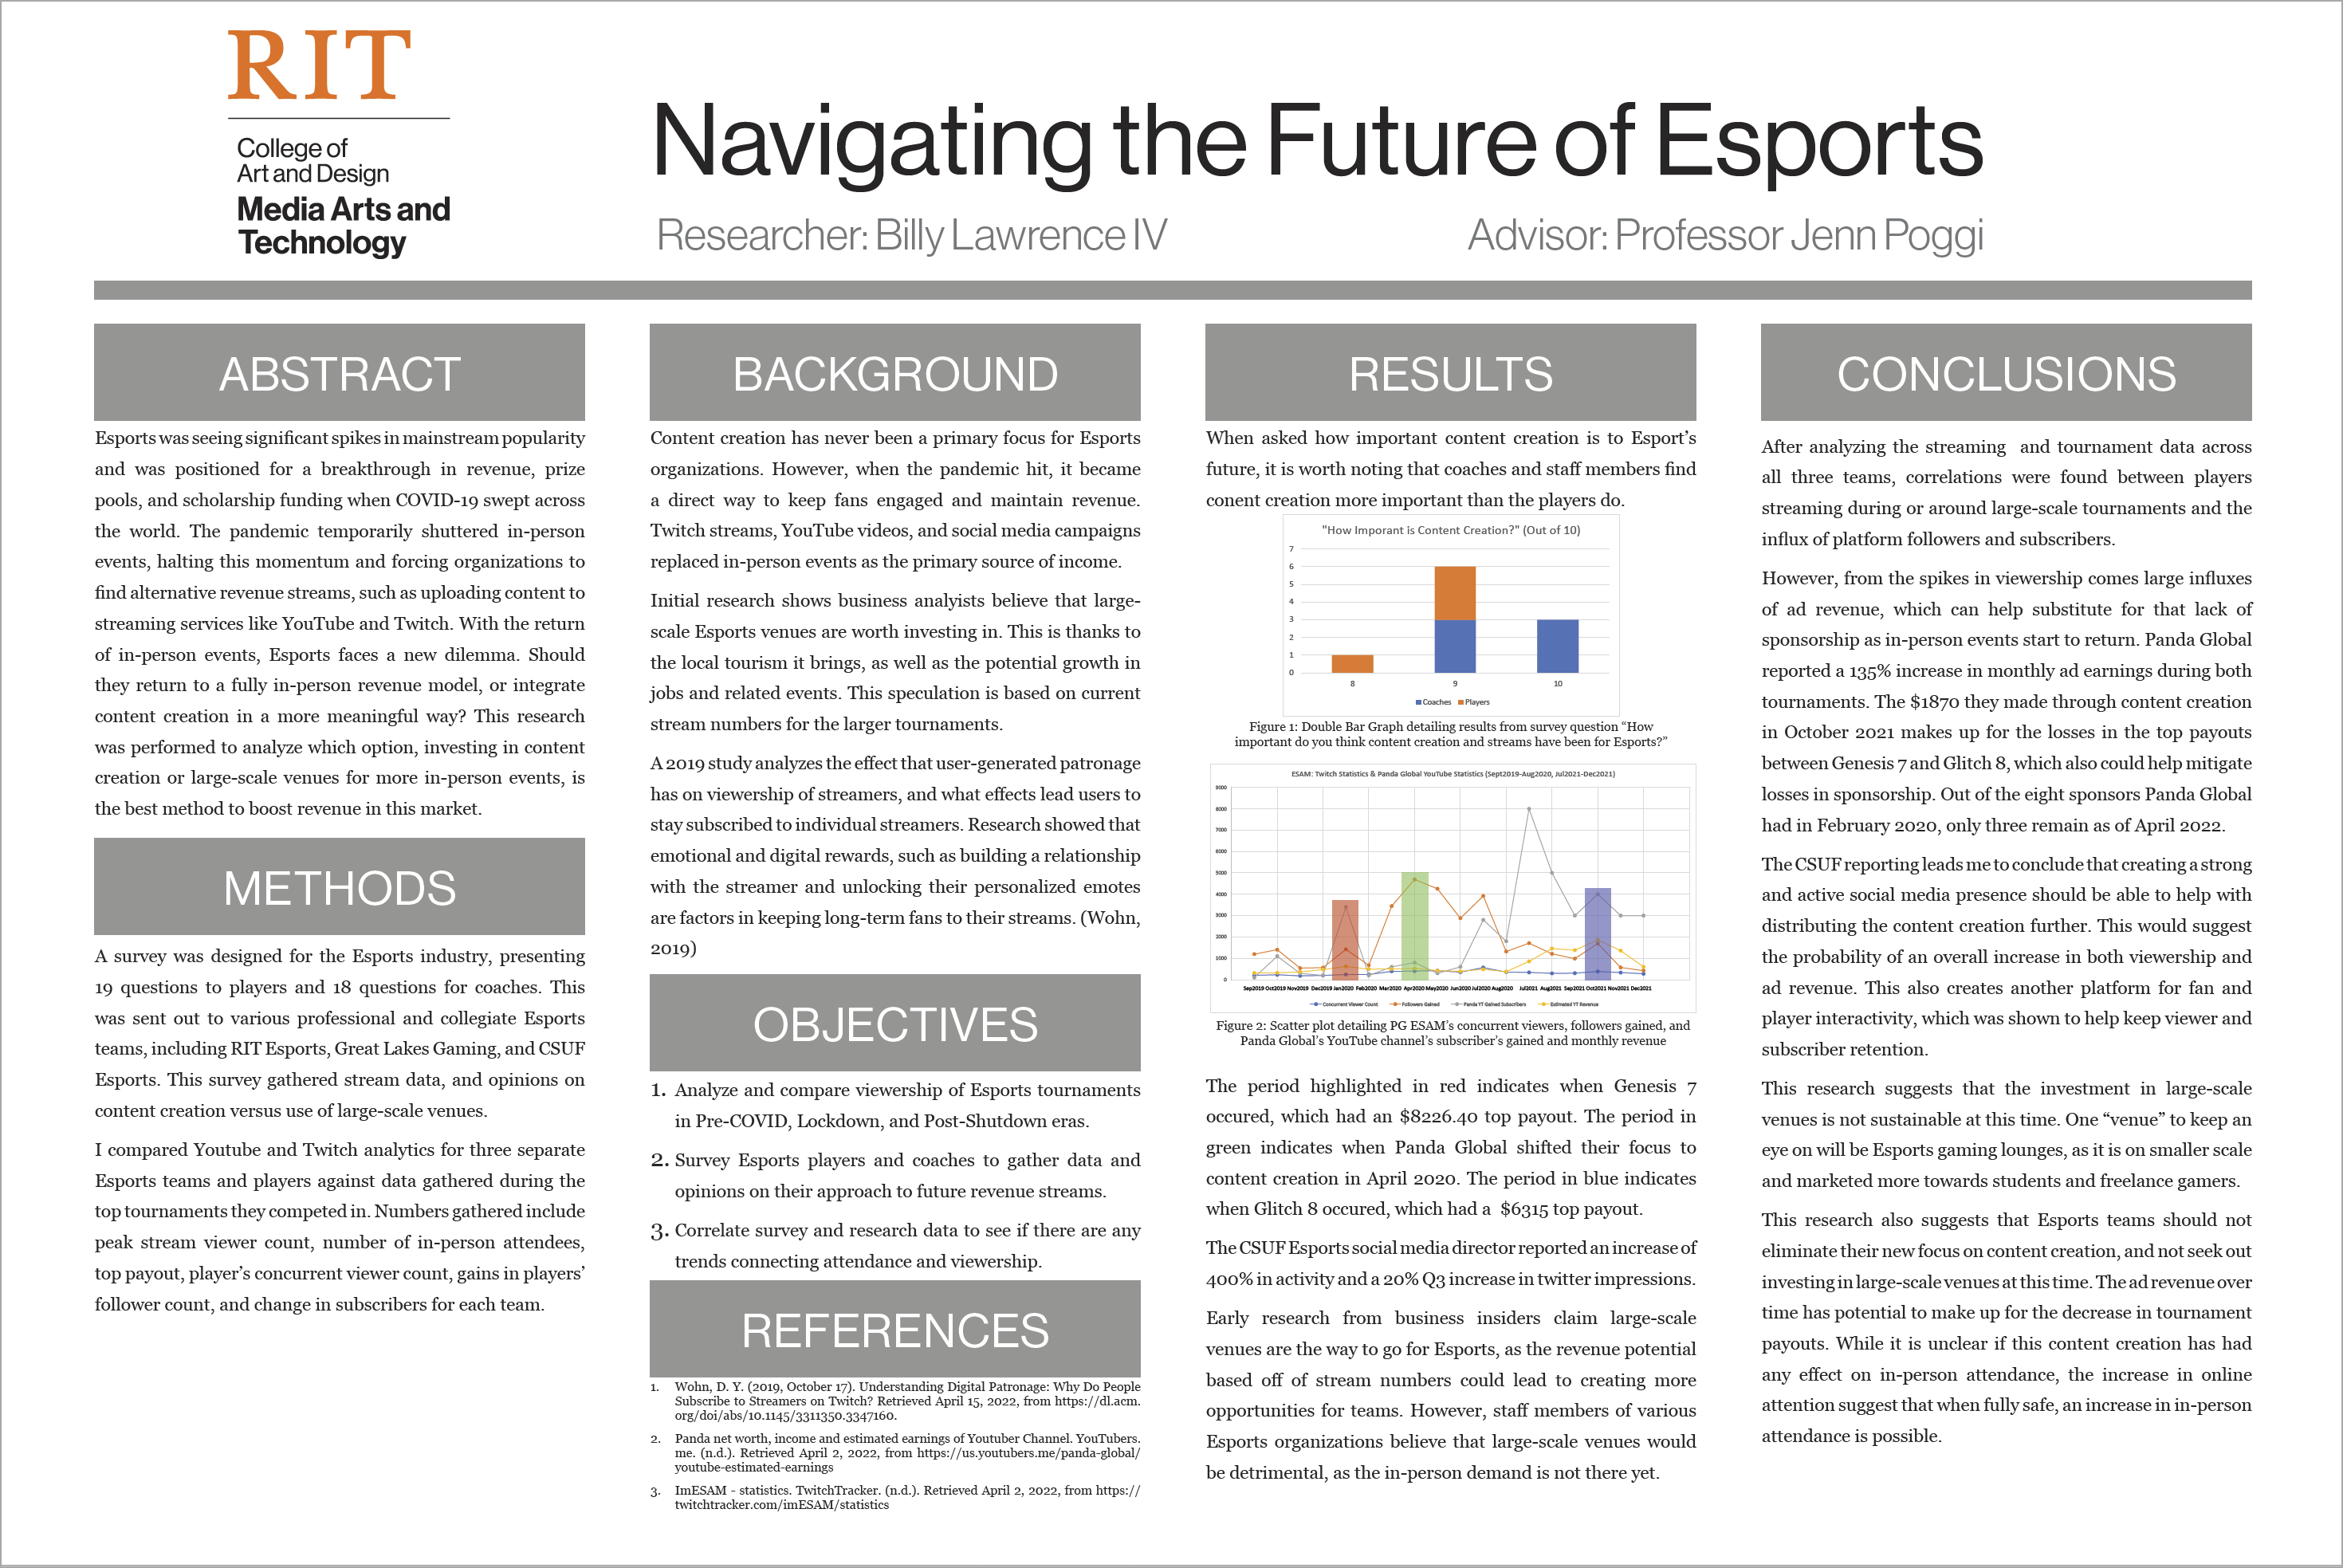 A poster highlighting research on navigating the future of E-sports.